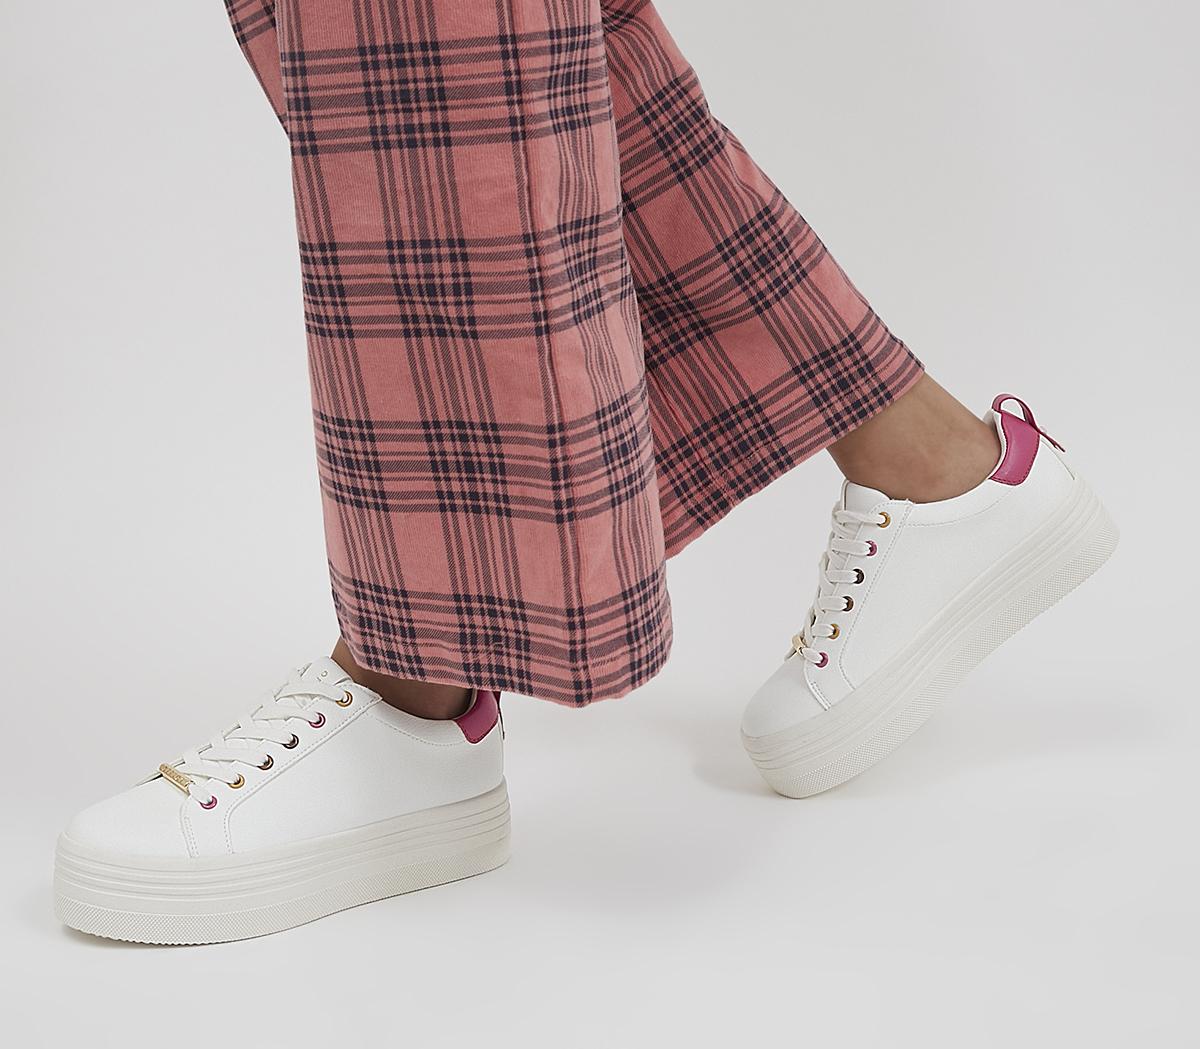 OfficeFetch Flatform Lace Up TrainersWhite Pink Mix